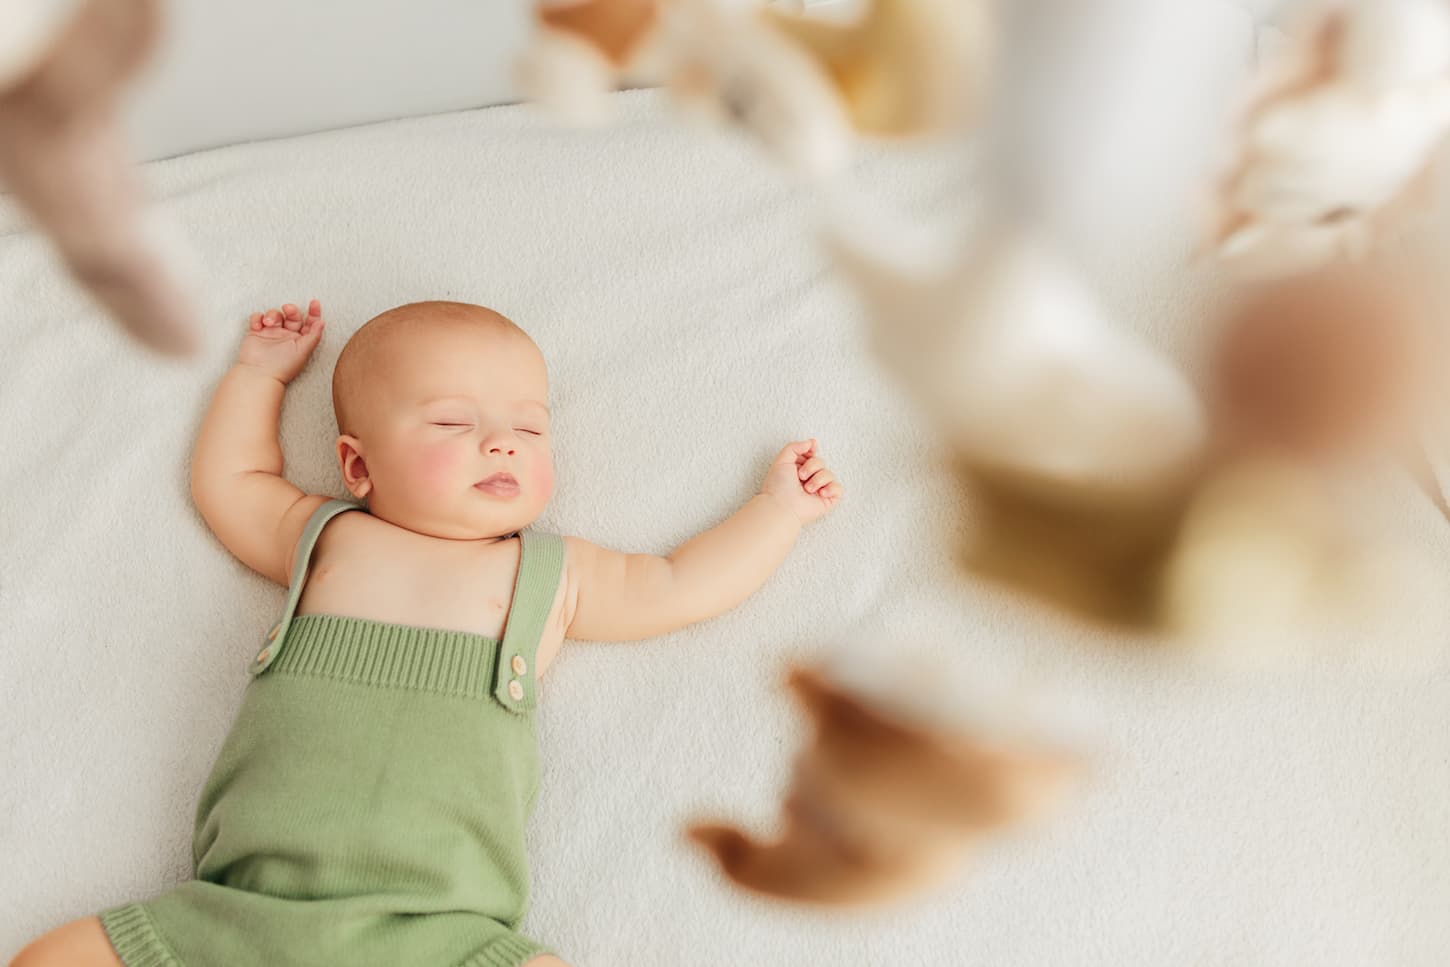 An image of a baby soundly sleeping in a crib.